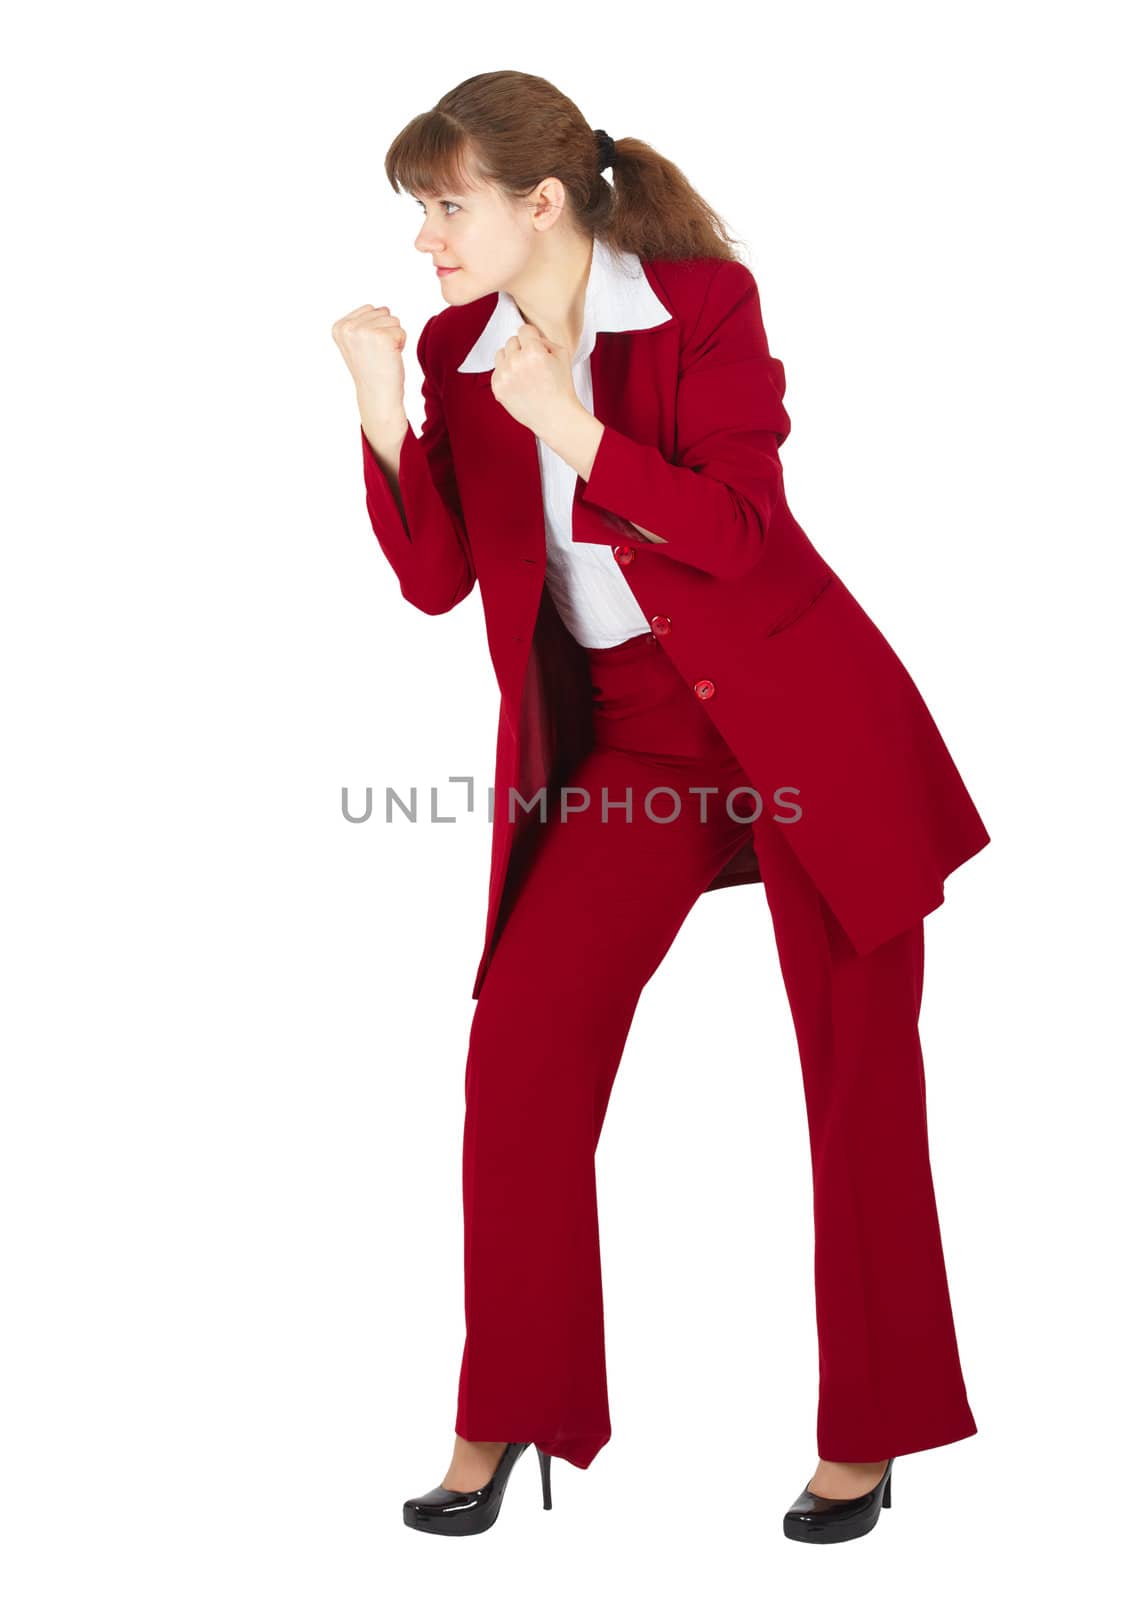 Girl in a business suit is ready for any fight